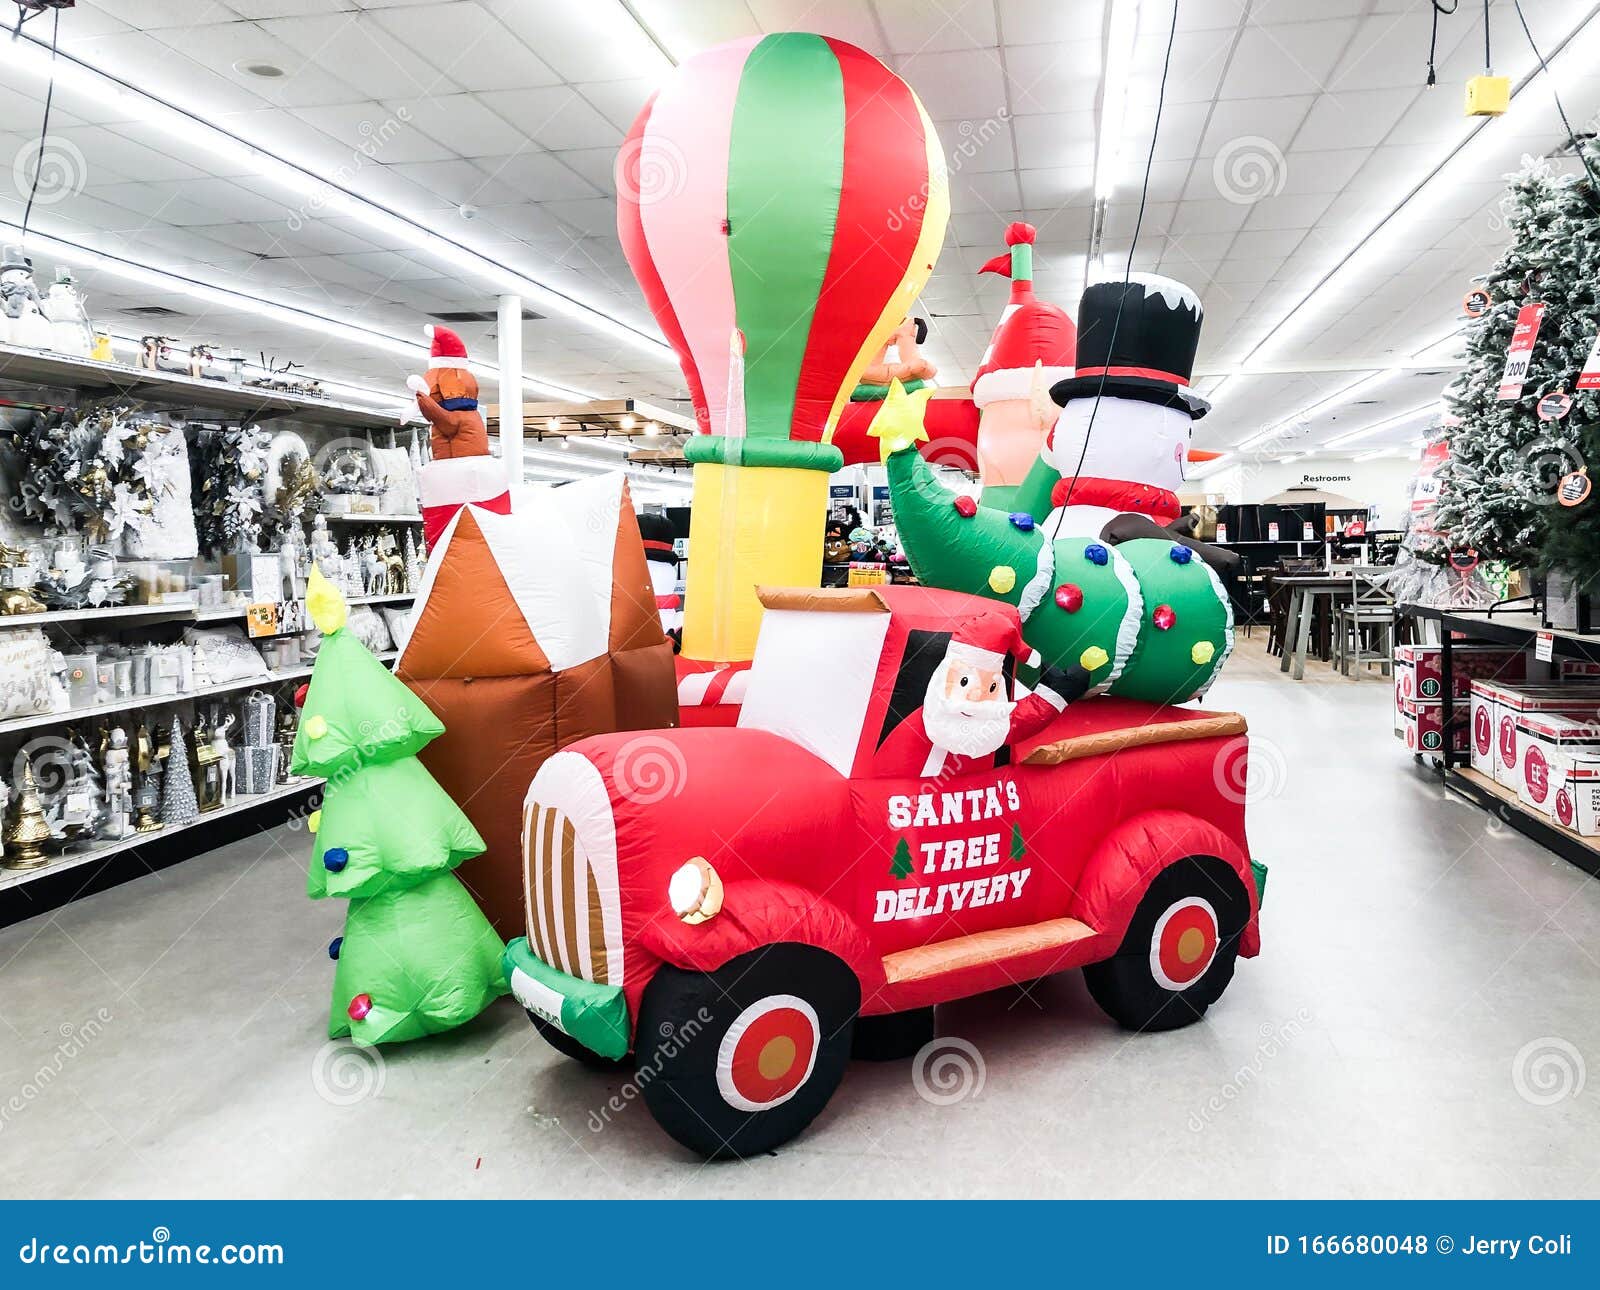 Christmas Inflatable Decorations for Sale at Big Lots Store in ...